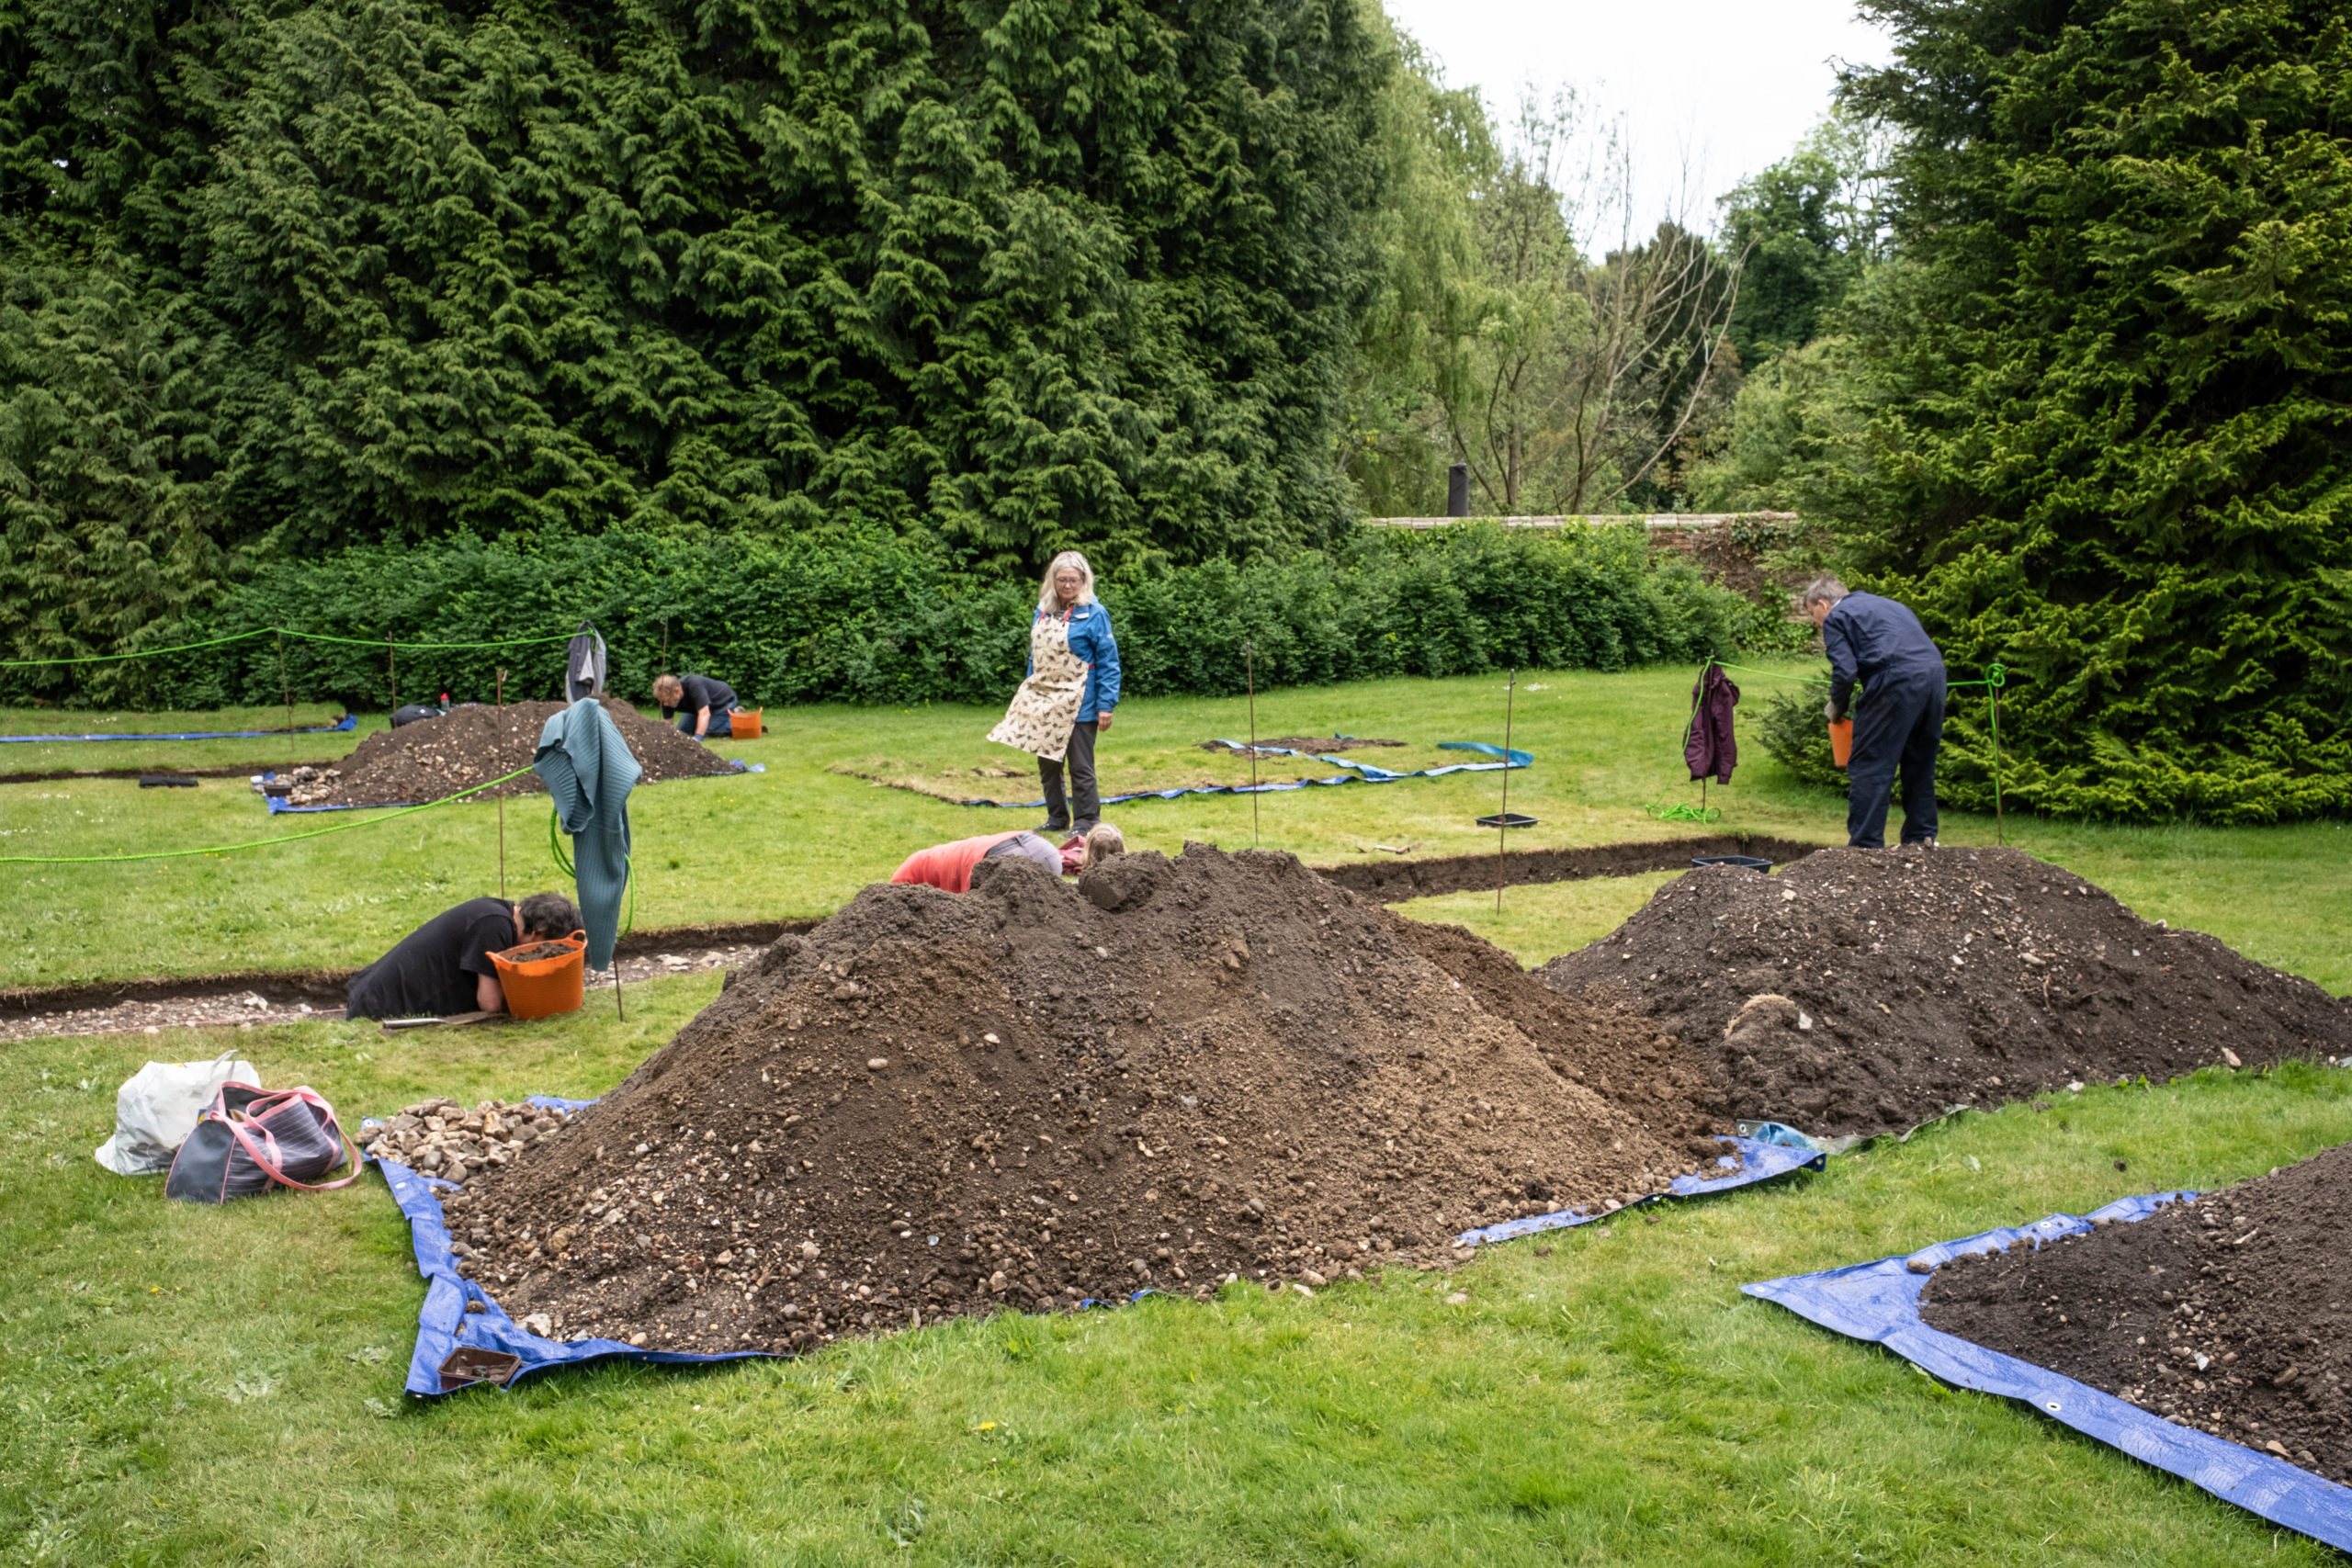 Two people digging in trench in ground with mounds of earth in front